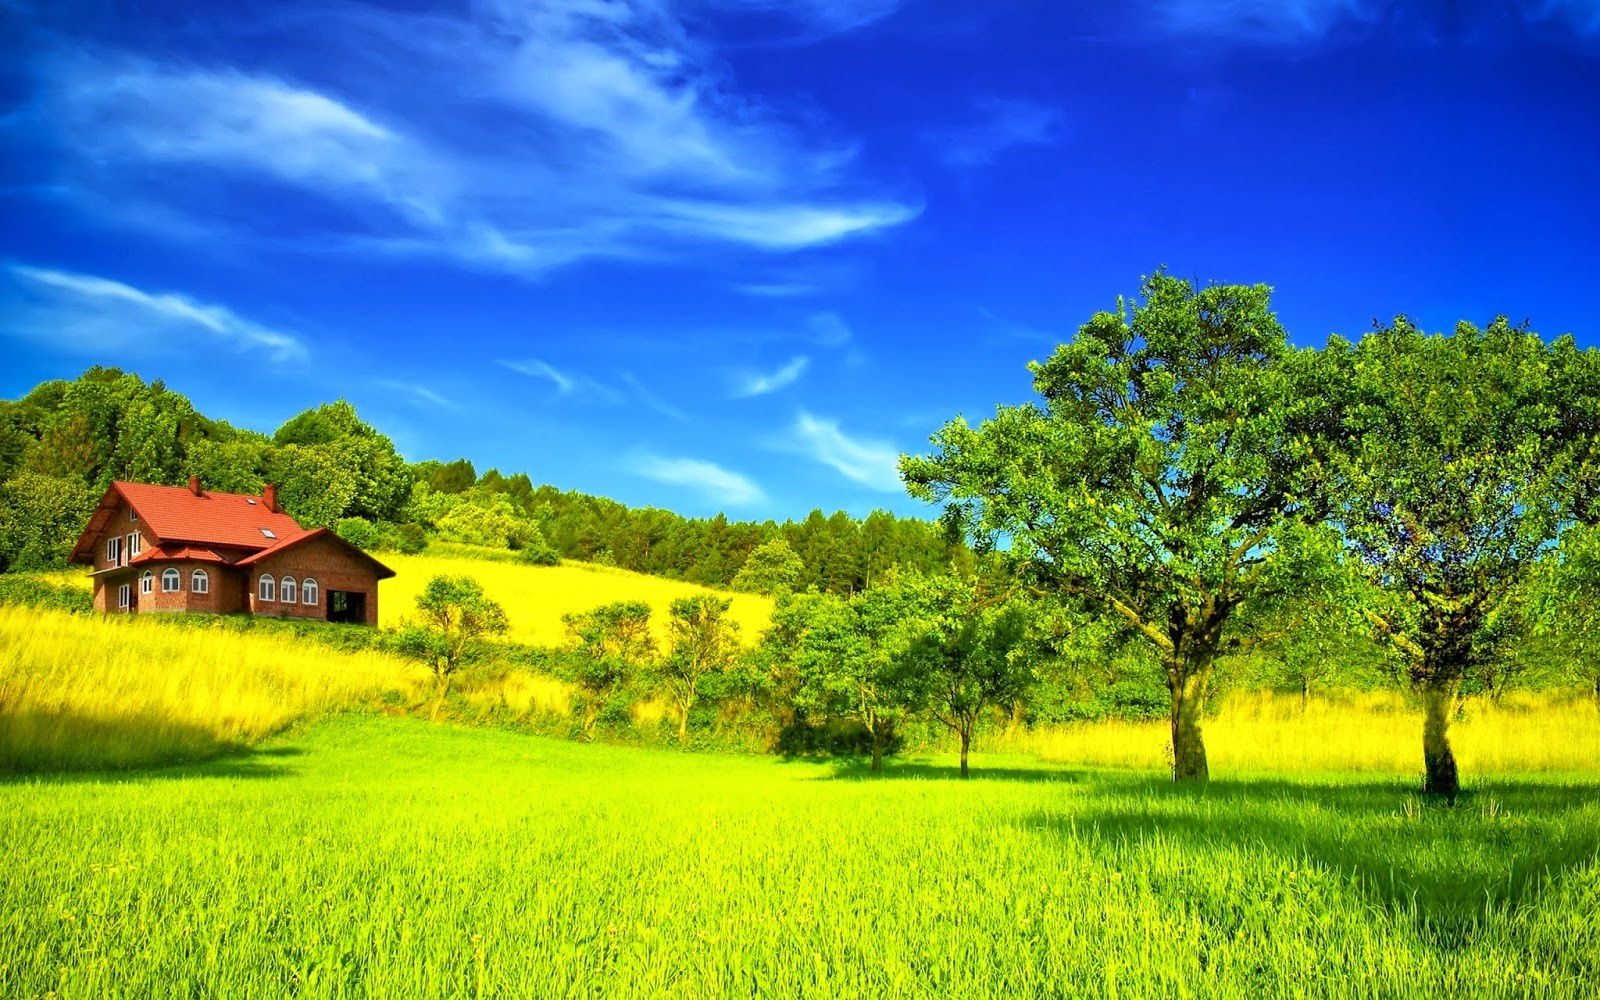 most beautiful green nature wallpapers in the world – Wallpaper